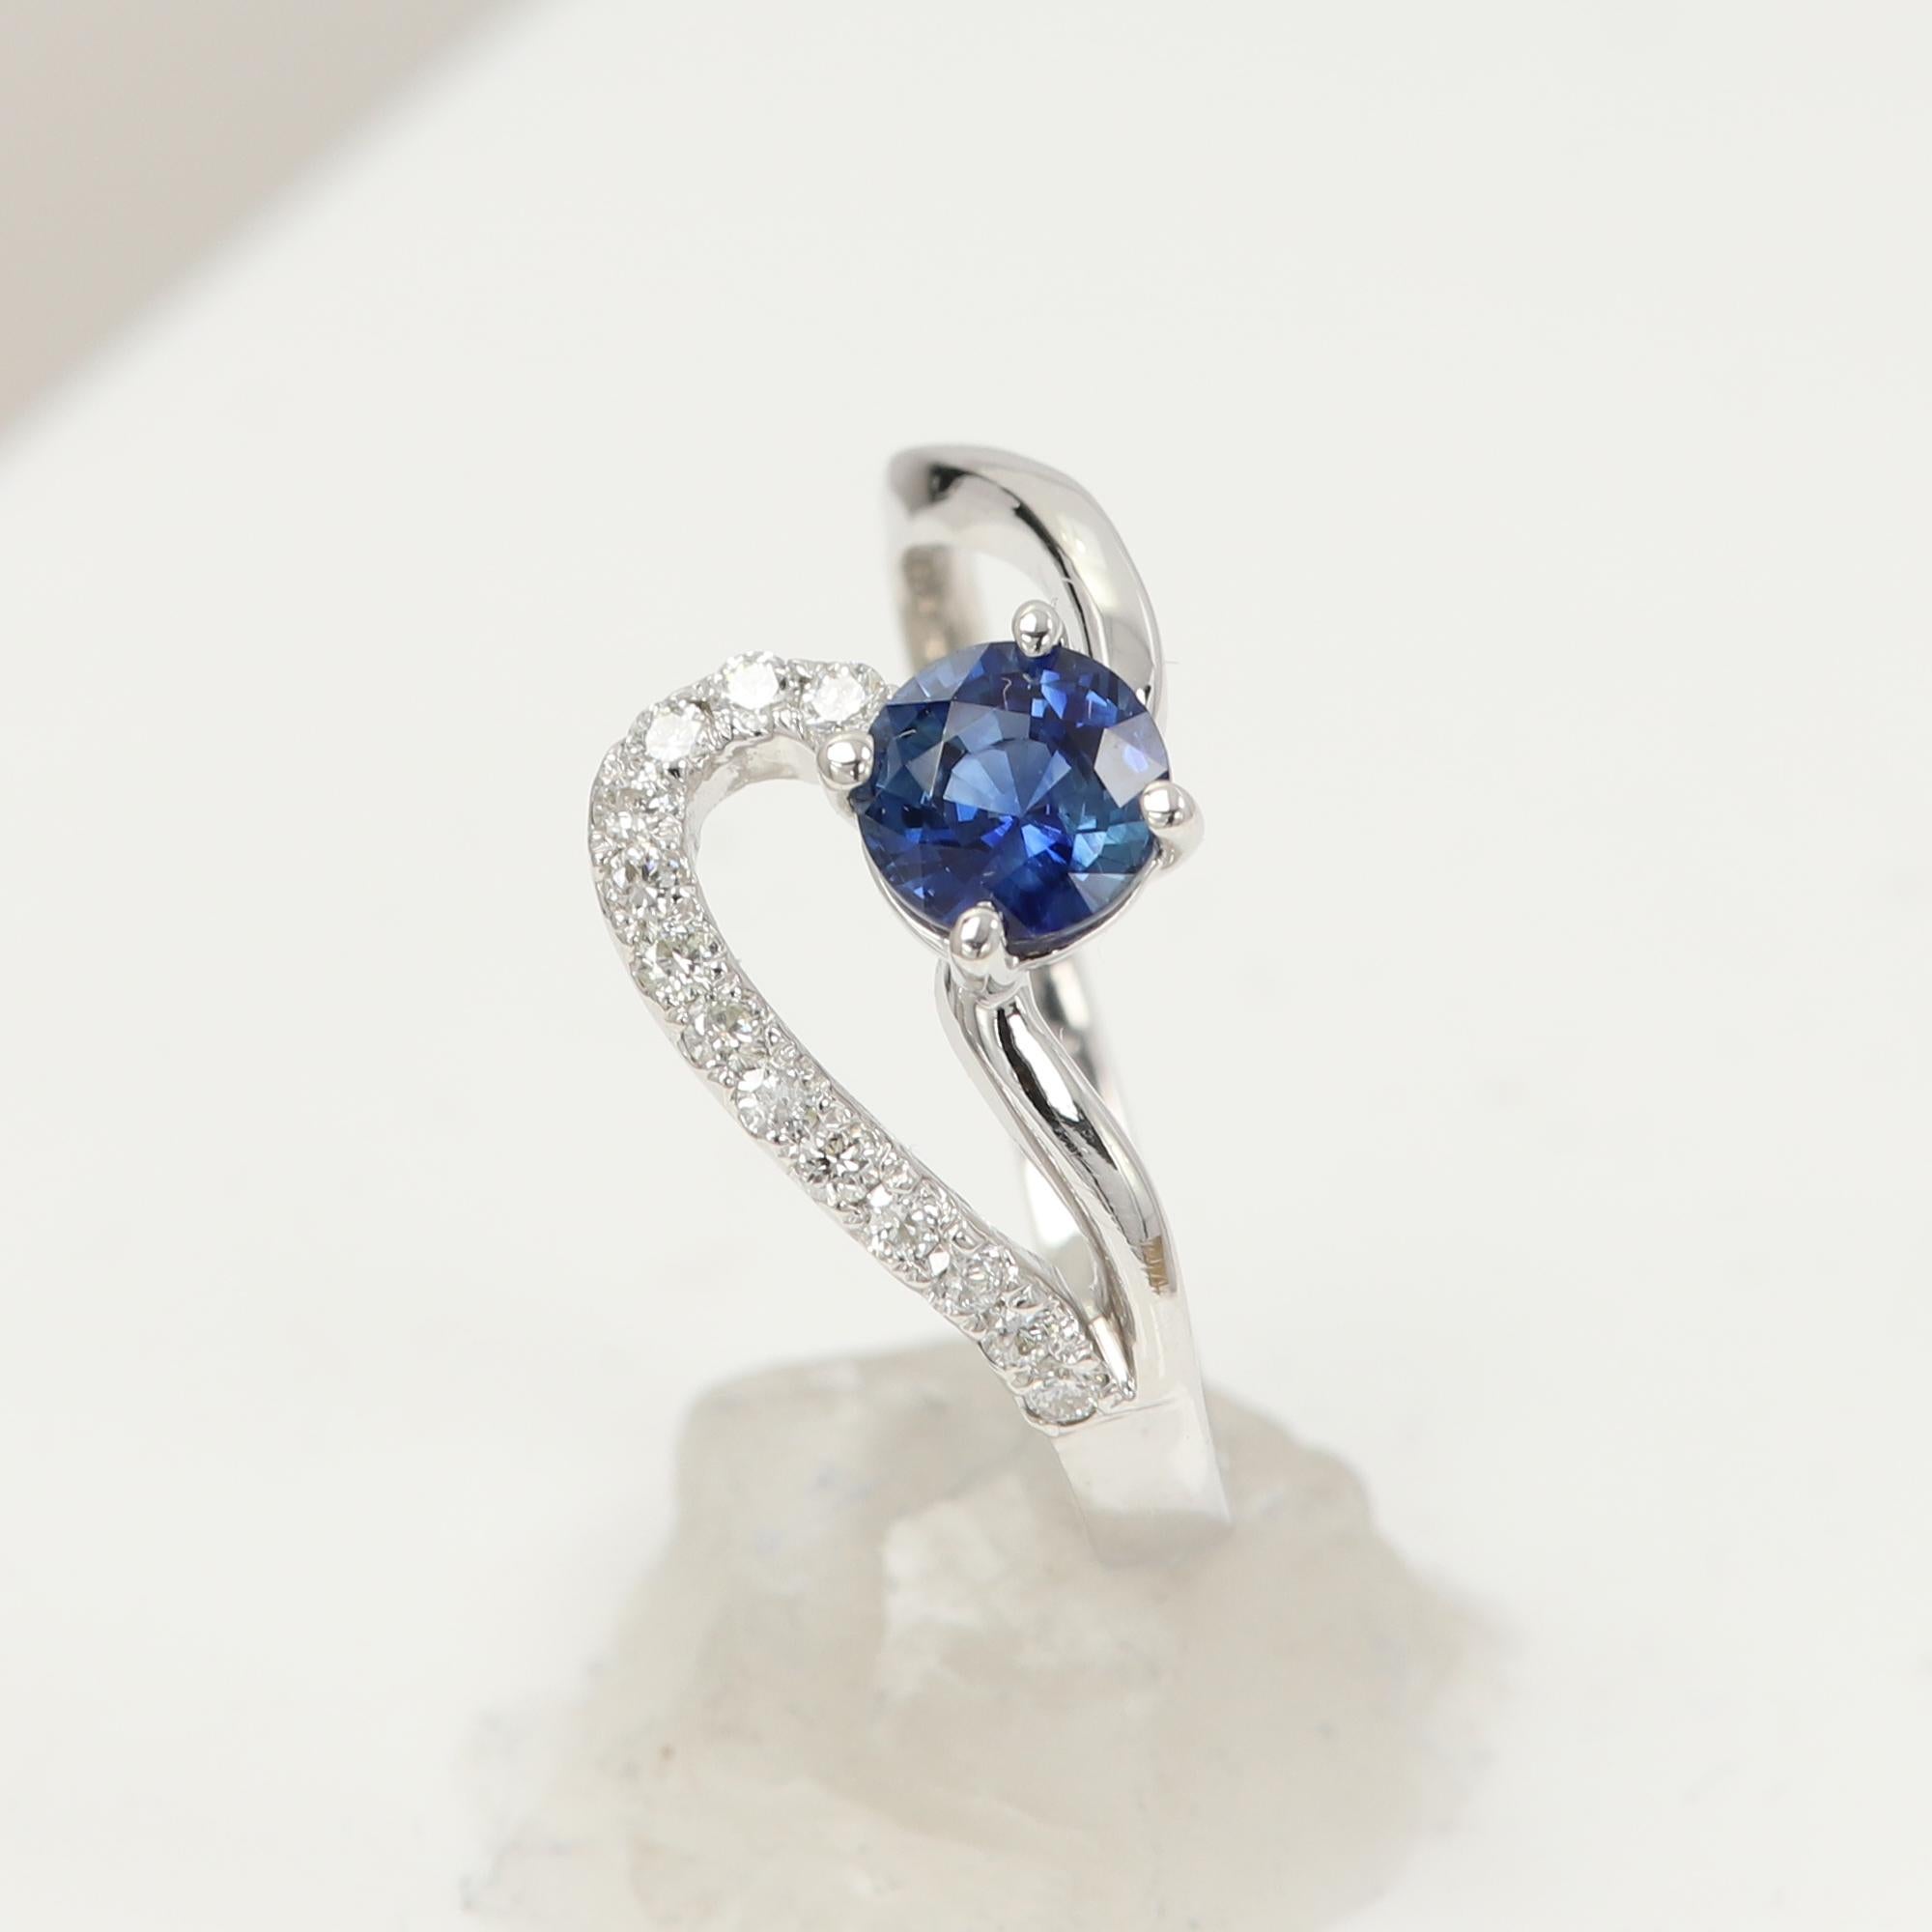 a artistic swirl nature sapphire ring
Round sapphire approx 1.0 carat (6.00 mm)
14k white gold approx 4.5 grams
small natural diamonds on the side approx 0.30 carat  H-SI
Sapphire is a clean good brilliant on the darker side with hues of sparkle